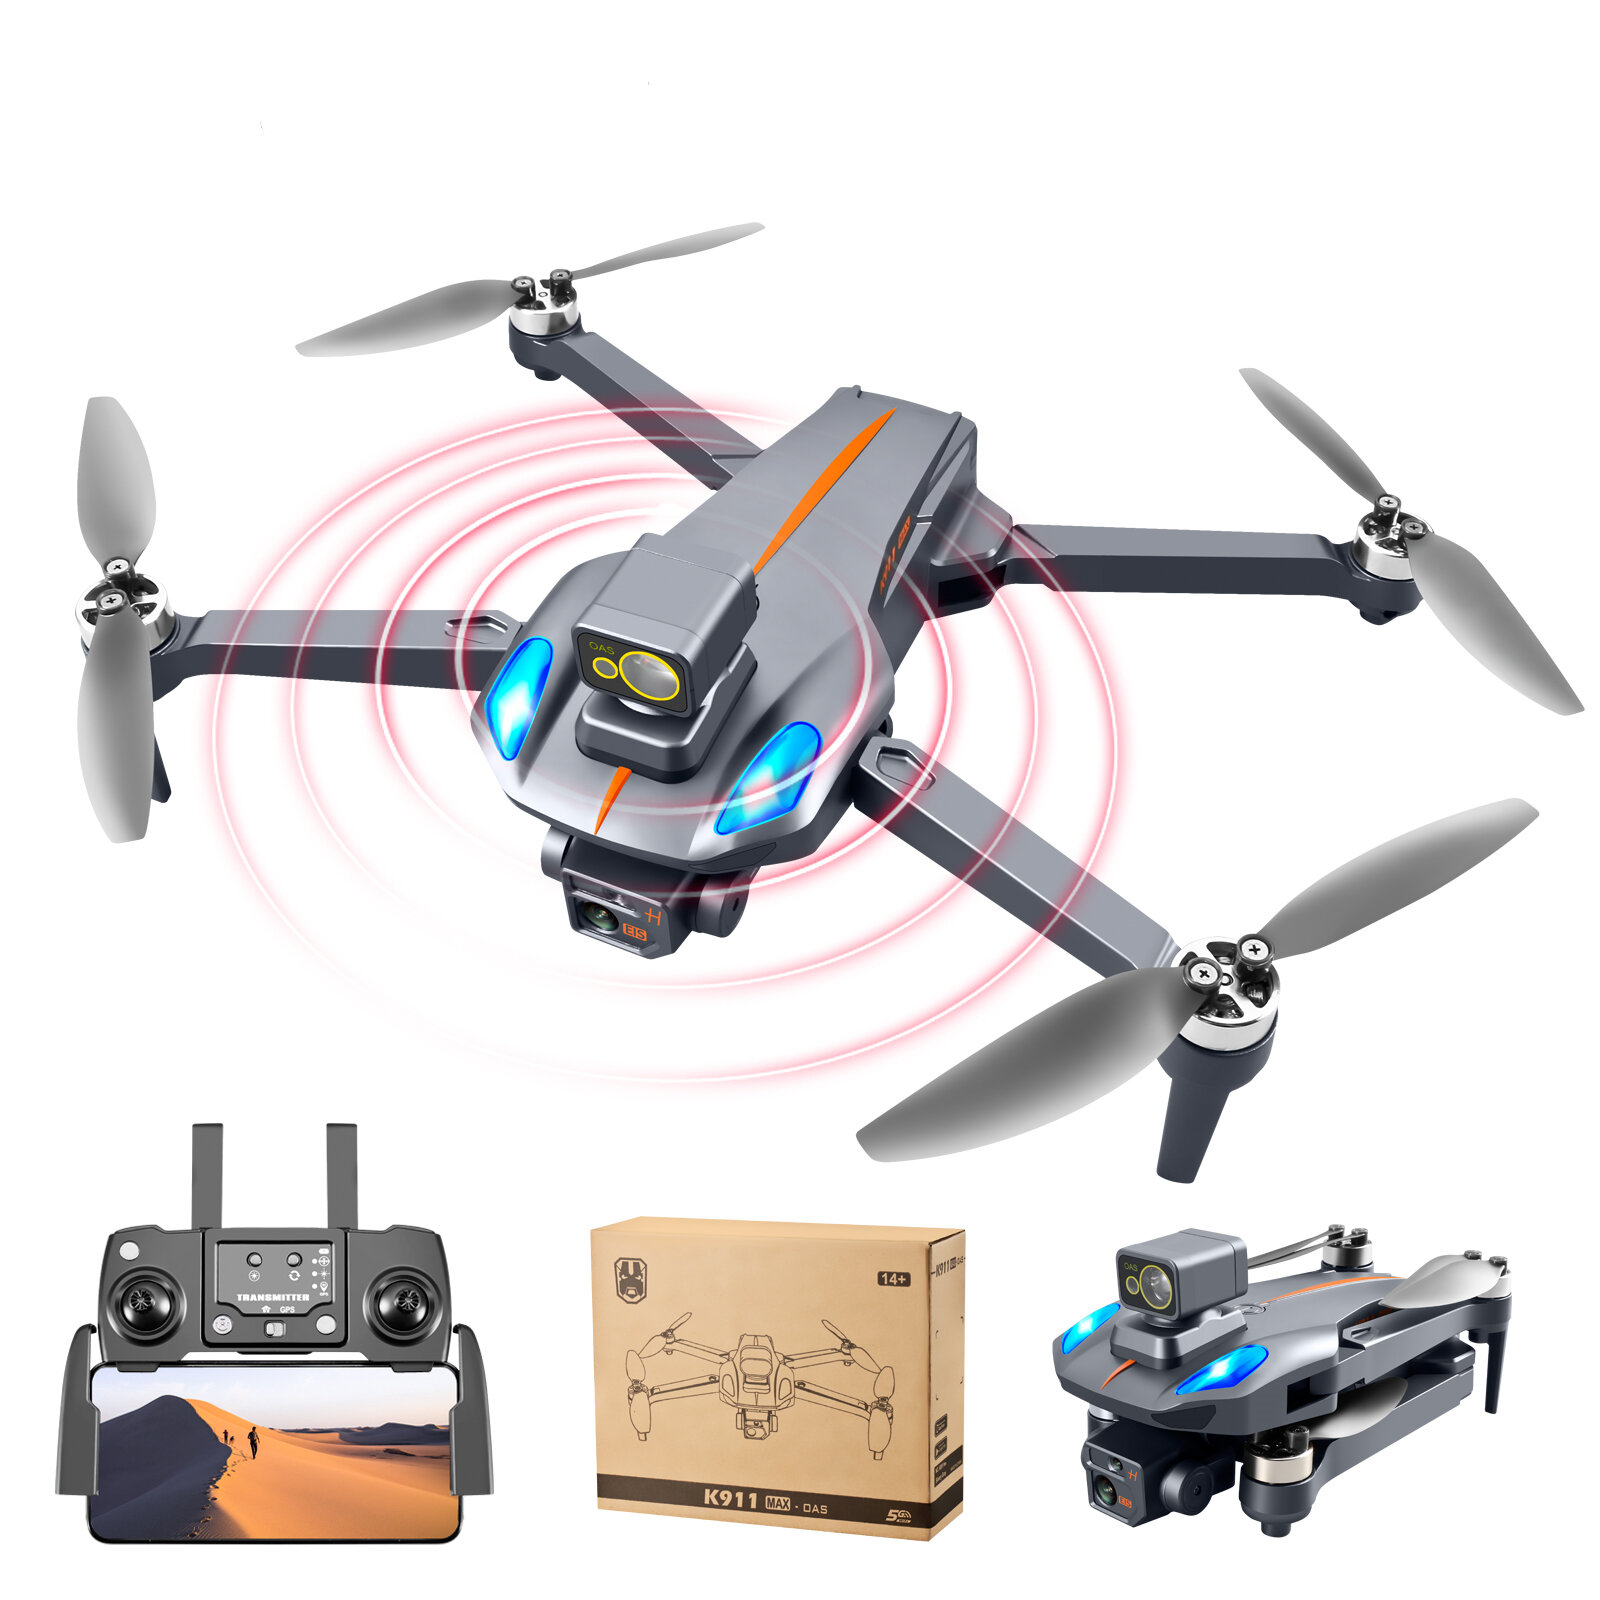 K911 Max 5G WIFI FPV GPS with 8K ESC Dual Camera 360° Obstacle Avoidance Optical Flow Positioning Brushless 225g Foldabl